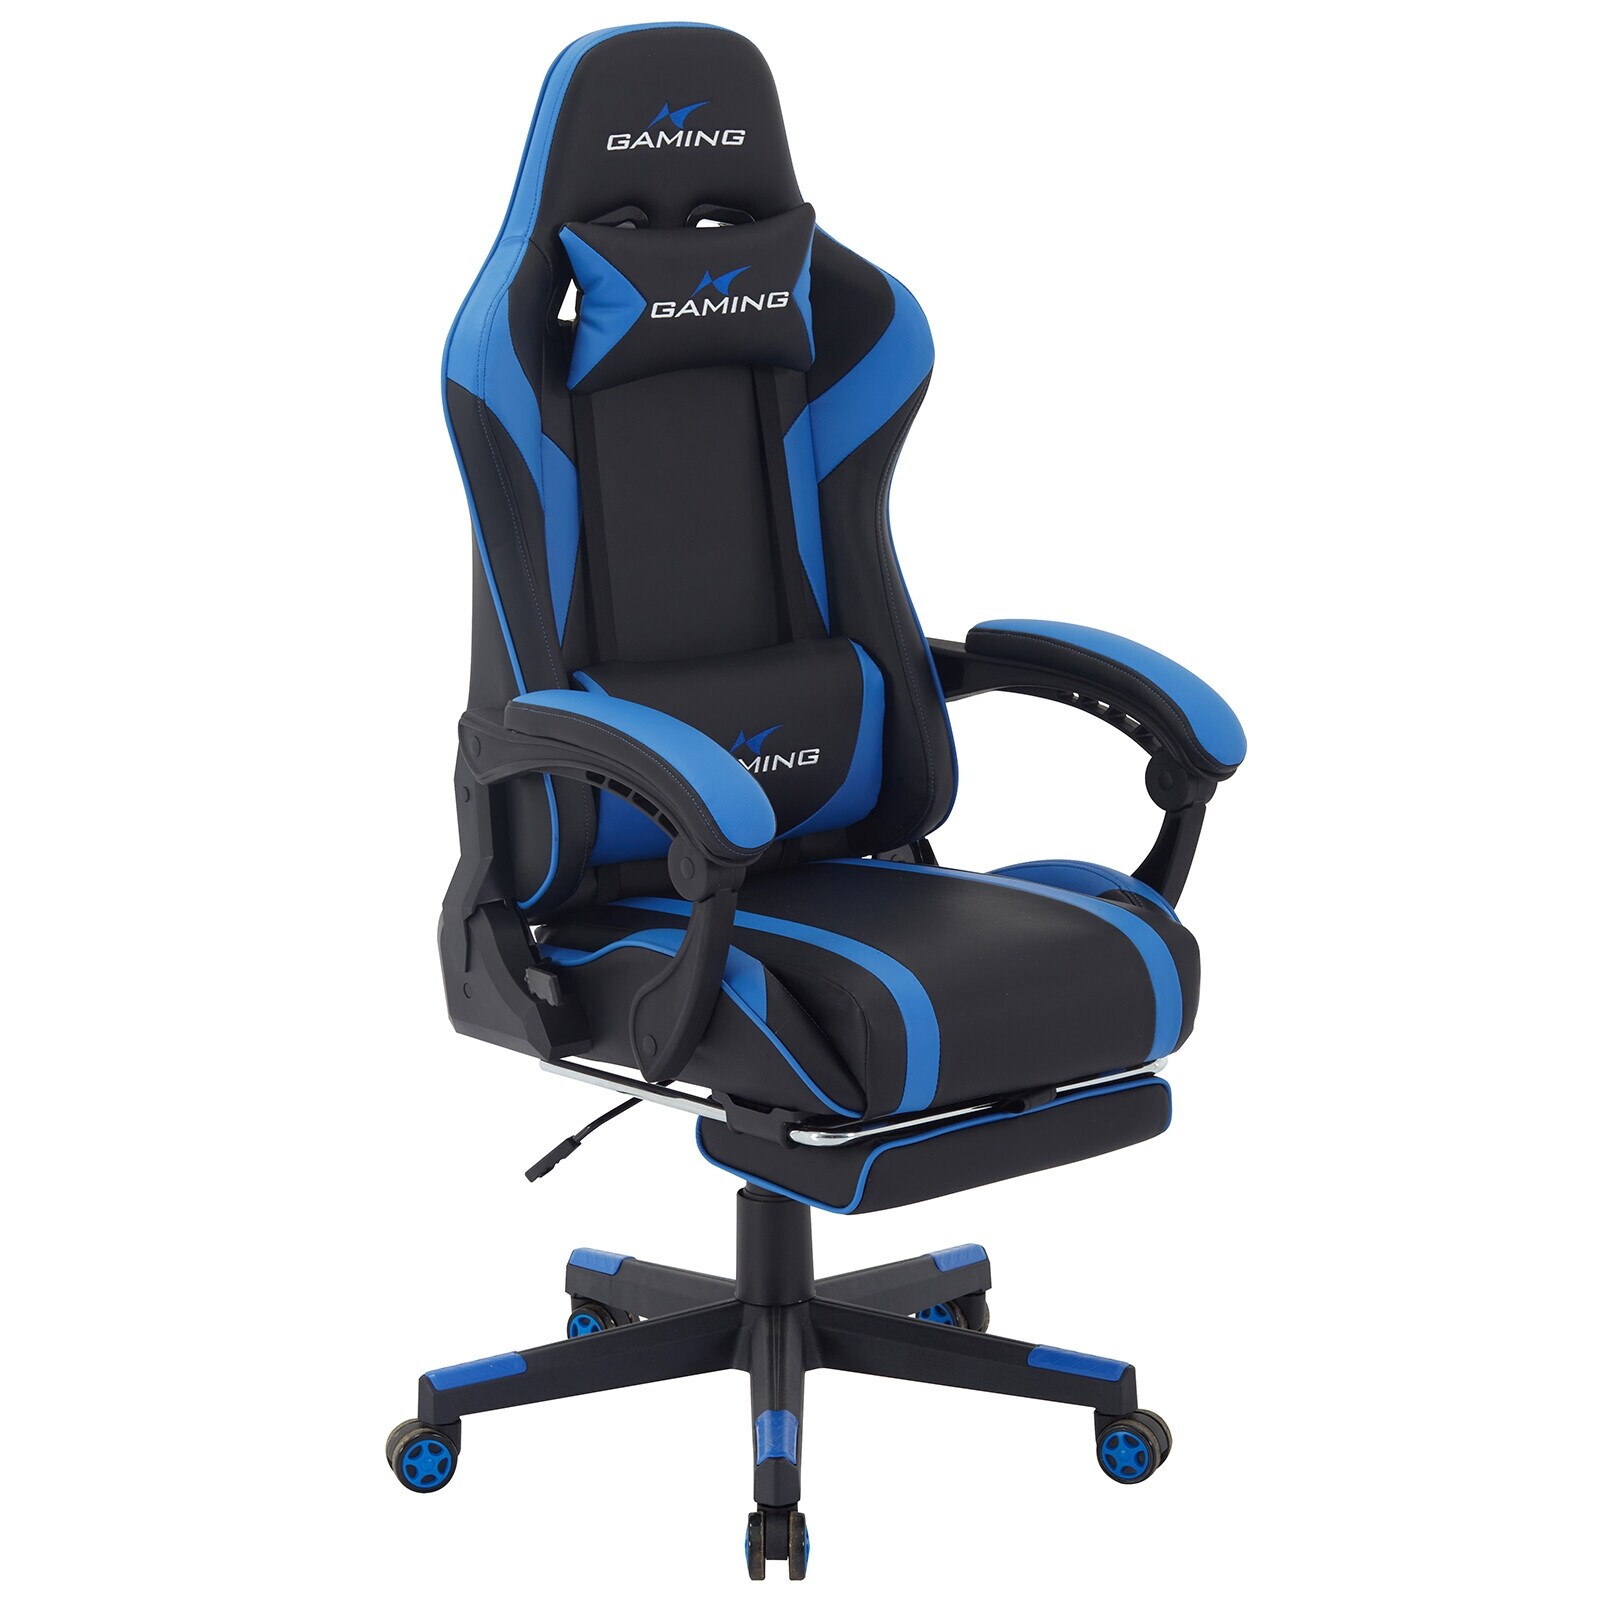 https://ak1.ostkcdn.com/images/products/is/images/direct/5519920c08e569e0df2ed3068d65a4330f8dbc6e/Commodore-Gaming-Chair-Ergonomic-Adjustable-Height-Swivel-Recliner-with-Adjustable-Armrest-and-Retractable-Footrest.jpg